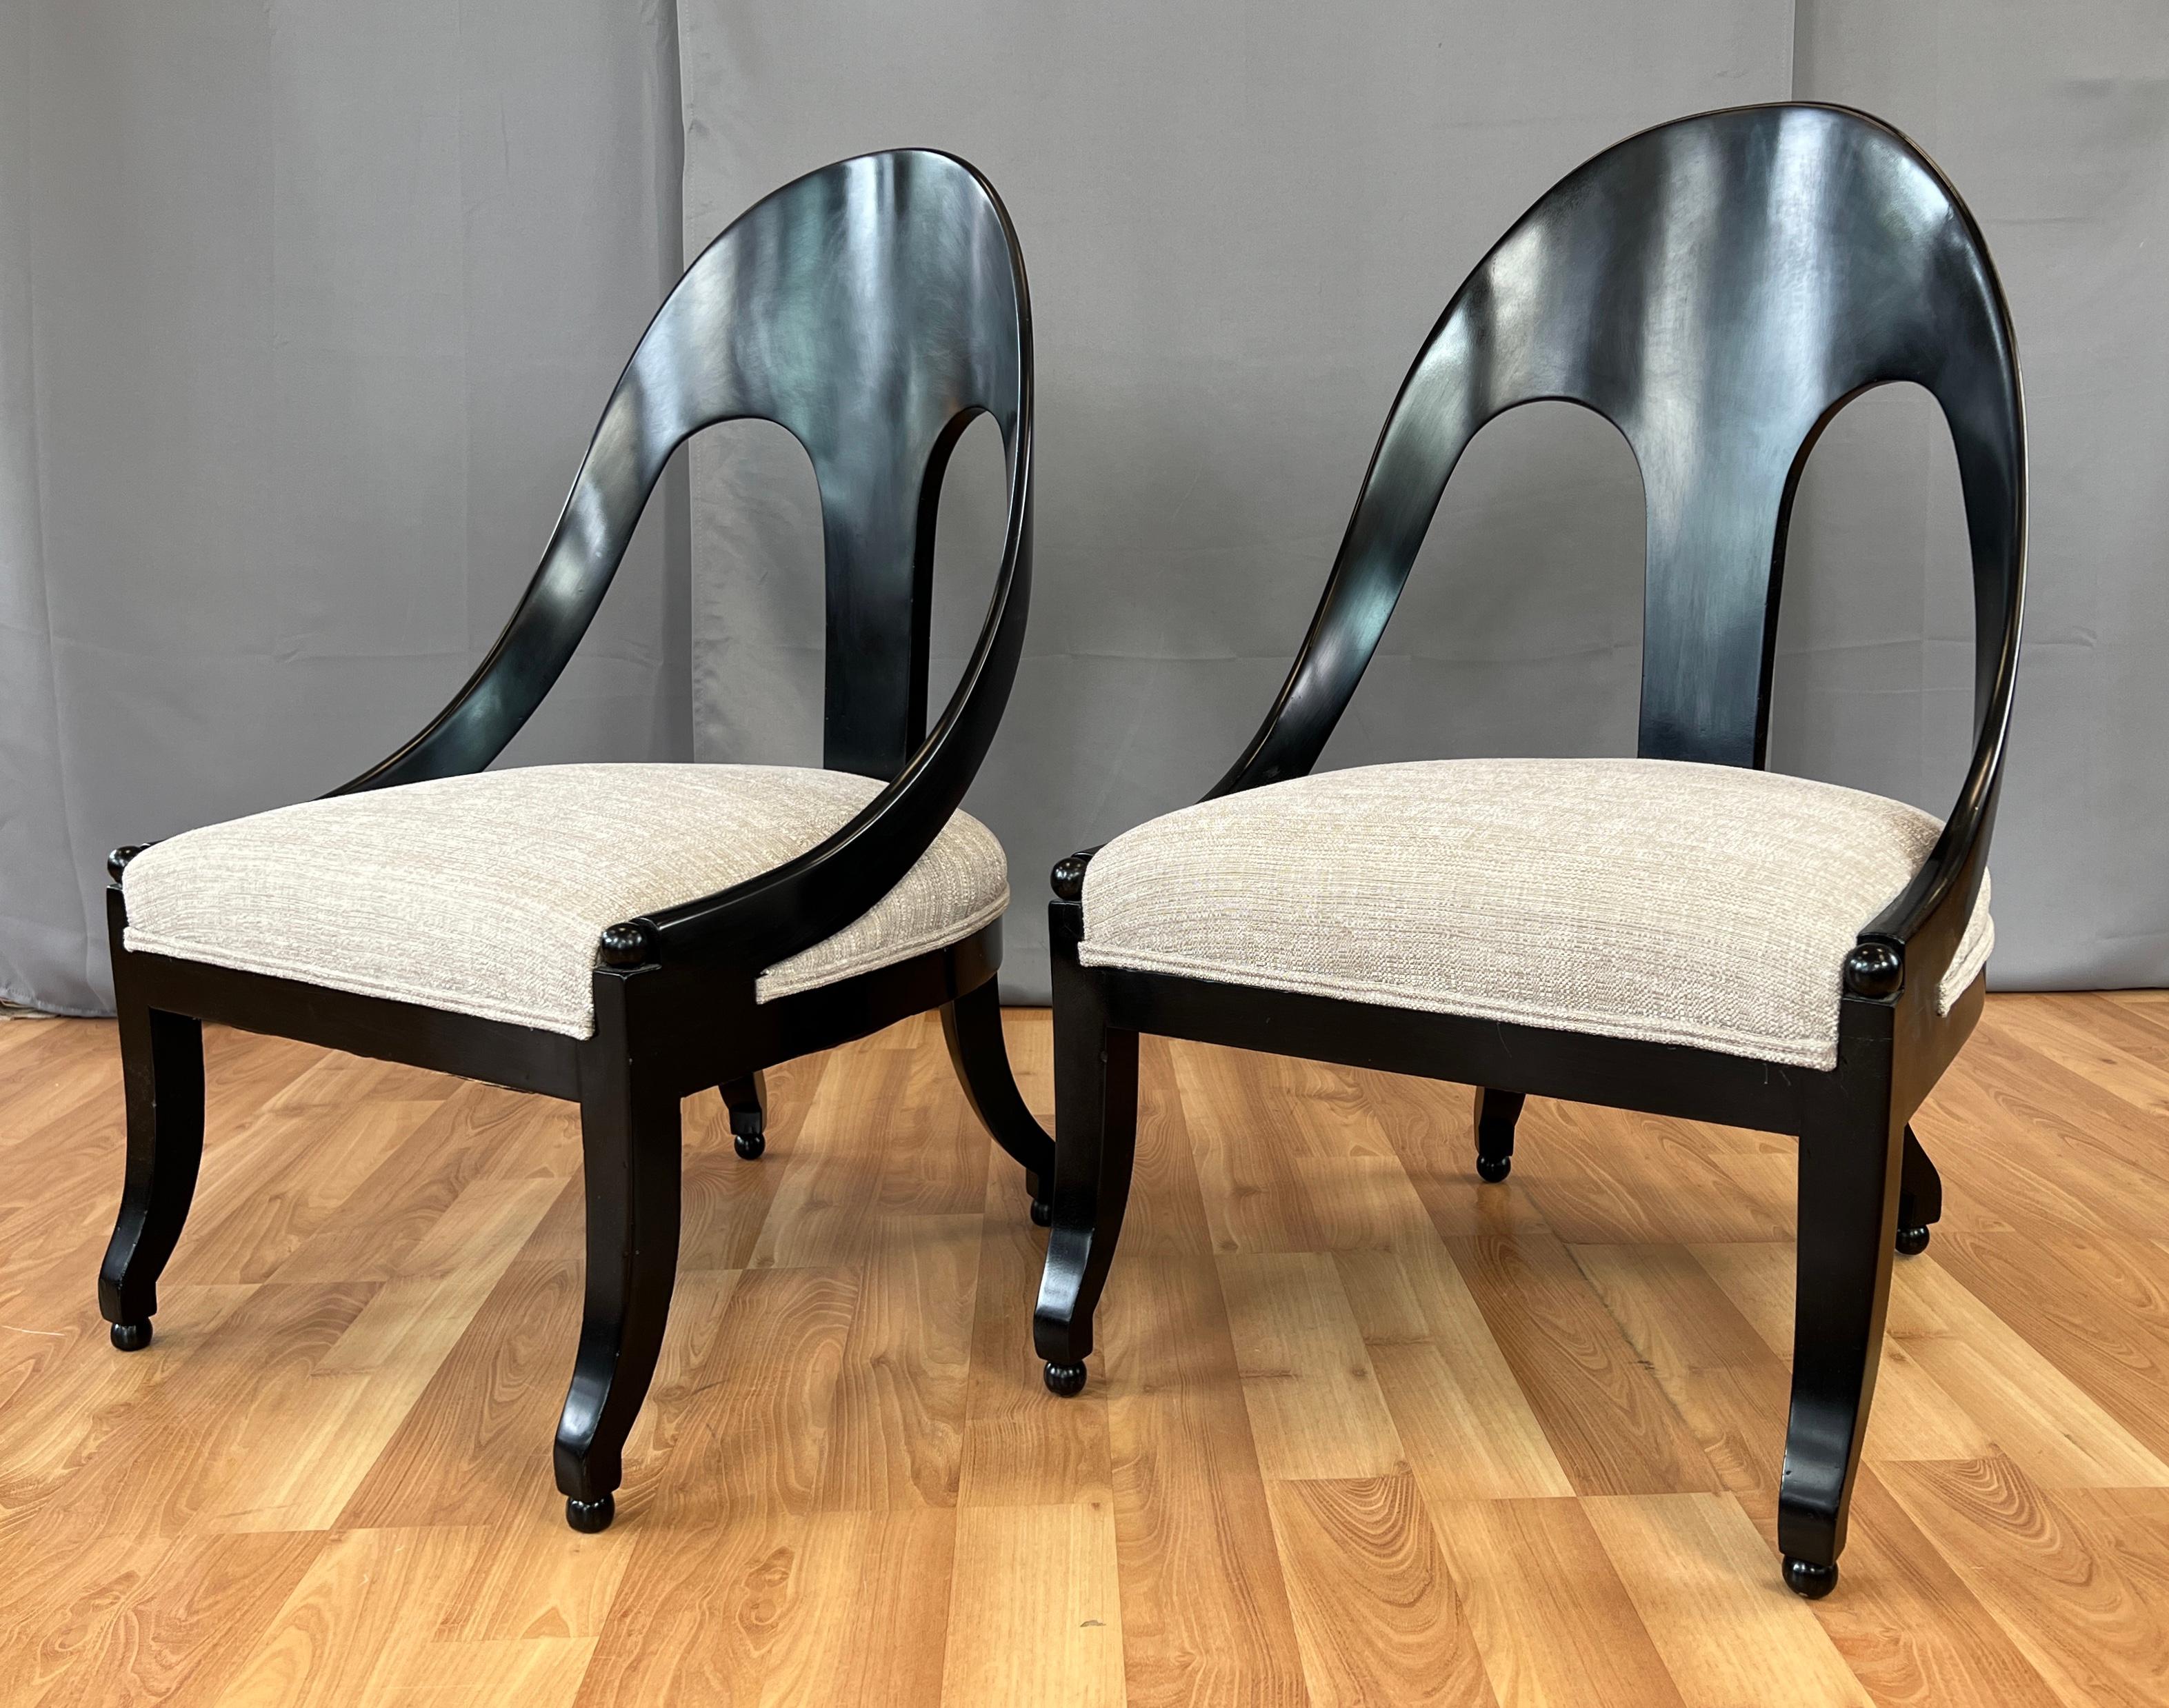 Offered here is a pair of neoclassical style spoon back slipper chairs designed by Michael Taylor for Baker Furniture.
Black frames with beige upholstery that feels to be a heavy cotton blend. Upholstery looks to be new, foam feels great so I